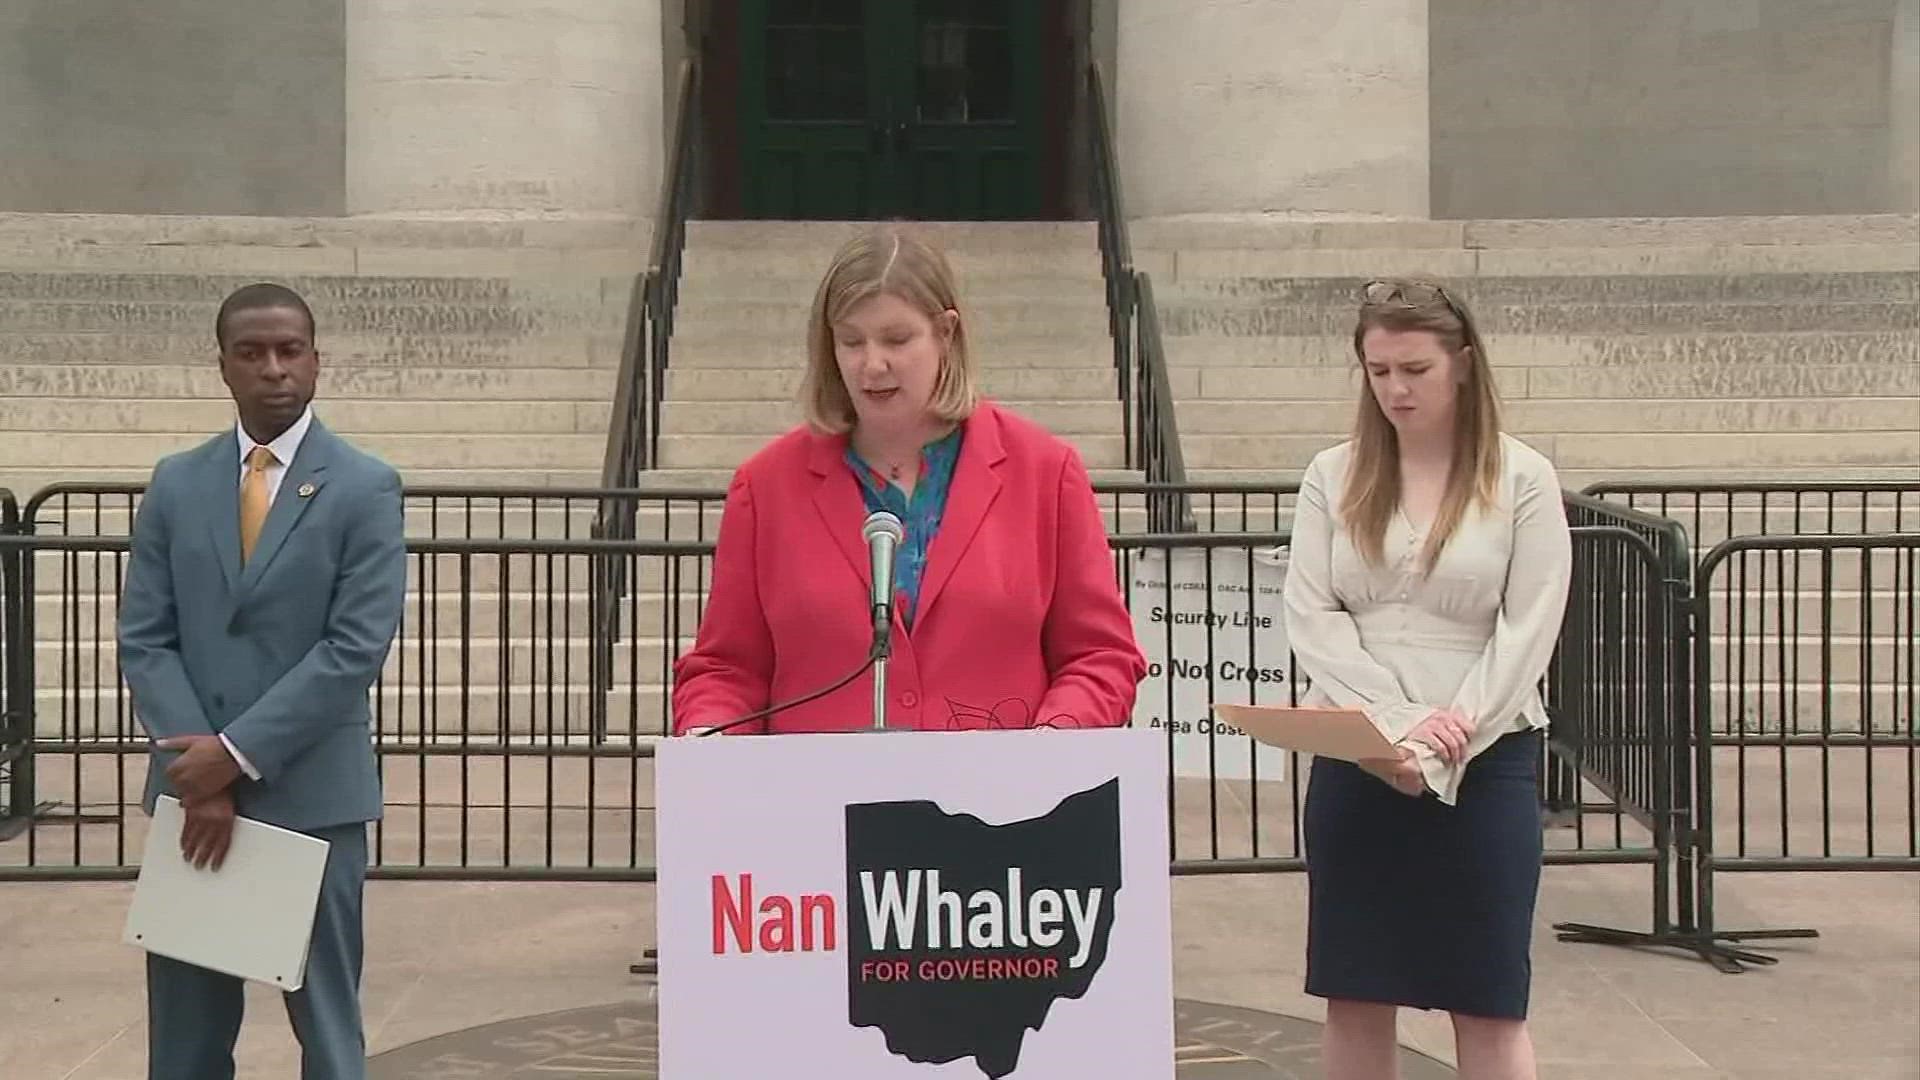 Nan Whaley, a 2022 gubernatorial candidate was not charged with any crime and the U.S. Department of Justice has closed the investigation.